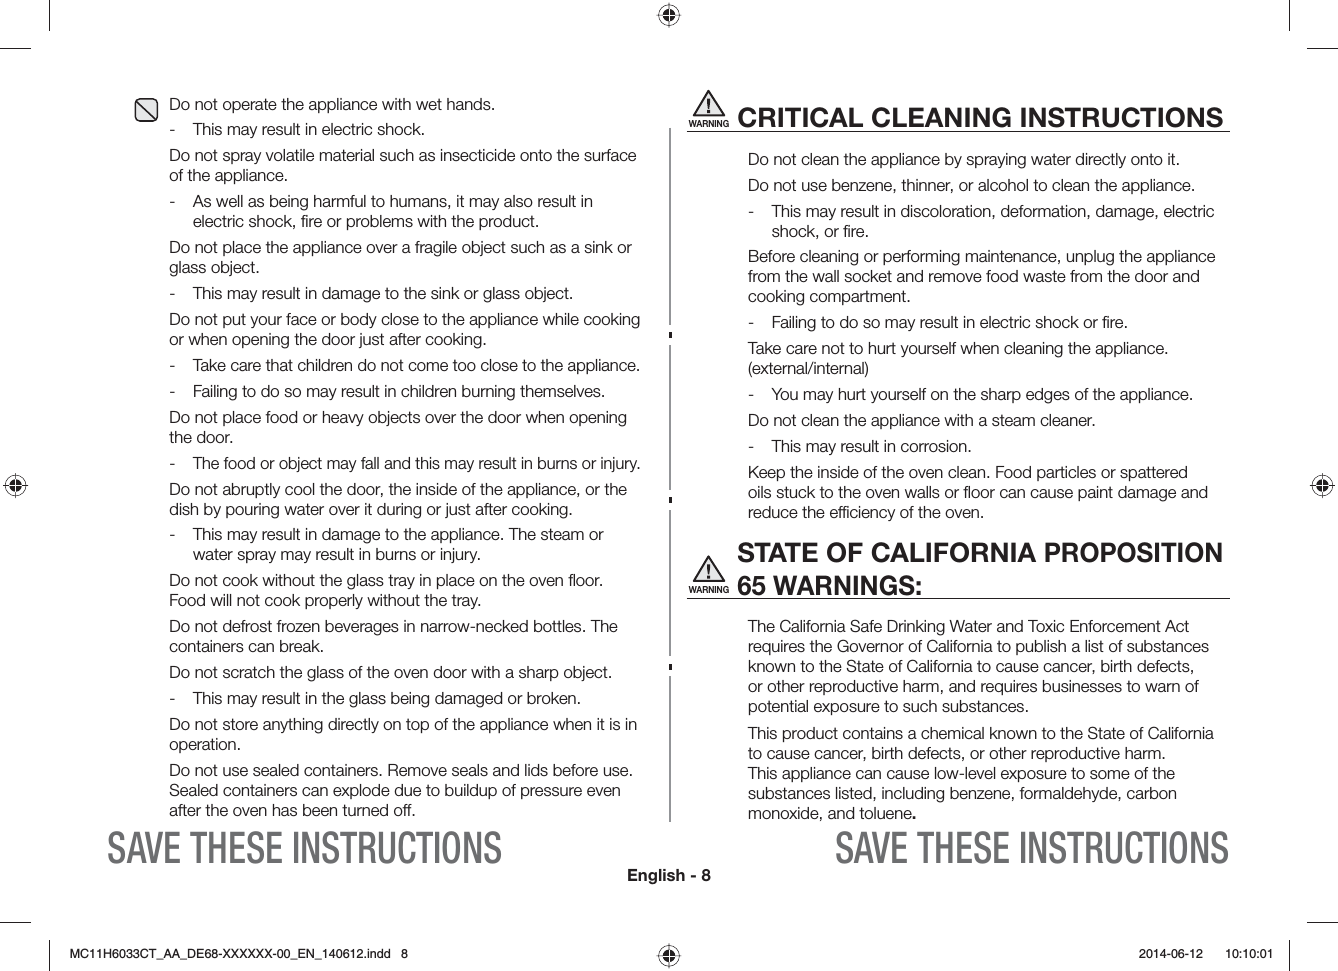 English - 8SAVE THESE INSTRUCTIONS SAVE THESE INSTRUCTIONSWARNINGCRITICAL CLEANING INSTRUCTIONSDo not clean the appliance by spraying water directly onto it.Do not use benzene, thinner, or alcohol to clean the appliance. -  This may result in discoloration, deformation, damage, electric shock, or ﬁre. Before cleaning or performing maintenance, unplug the appliance from the wall socket and remove food waste from the door and cooking compartment.-  Failing to do so may result in electric shock or ﬁre.Take care not to hurt yourself when cleaning the appliance. (external/internal) -  You may hurt yourself on the sharp edges of the appliance. Do not clean the appliance with a steam cleaner. -  This may result in corrosion. Keep the inside of the oven clean. Food particles or spattered oils stuck to the oven walls or ﬂoor can cause paint damage and reduce the eciency of the oven.WARNING STATE OF CALIFORNIA PROPOSITION 65 WARNINGS:The California Safe Drinking Water and Toxic Enforcement Act requires the Governor of California to publish a list of substances known to the State of California to cause cancer, birth defects, or other reproductive harm, and requires businesses to warn of potential exposure to such substances. This product contains a chemical known to the State of California to cause cancer, birth defects, or other reproductive harm. This appliance can cause low-level exposure to some of the substances listed, including benzene, formaldehyde, carbon monoxide, and toluene.Do not operate the appliance with wet hands.-  This may result in electric shock. Do not spray volatile material such as insecticide onto the surface of the appliance.-  As well as being harmful to humans, it may also result in electric shock, ﬁre or problems with the product. Do not place the appliance over a fragile object such as a sink or glass object. -  This may result in damage to the sink or glass object.Do not put your face or body close to the appliance while cooking or when opening the door just after cooking.- Take care that children do not come too close to the appliance.-  Failing to do so may result in children burning themselves. Do not place food or heavy objects over the door when opening the door.- The food or object may fall and this may result in burns or injury. Do not abruptly cool the door, the inside of the appliance, or the dish by pouring water over it during or just after cooking.-  This may result in damage to the appliance. The steam or water spray may result in burns or injury.Do not cook without the glass tray in place on the oven ﬂoor. Food will not cook properly without the tray. Do not defrost frozen beverages in narrow-necked bottles. The containers can break.Do not scratch the glass of the oven door with a sharp object.-  This may result in the glass being damaged or broken.Do not store anything directly on top of the appliance when it is in operation.Do not use sealed containers. Remove seals and lids before use. Sealed containers can explode due to buildup of pressure even after the oven has been turned o.MC11H6033CT_AA_DE68-XXXXXX-00_EN_140612.indd   8  